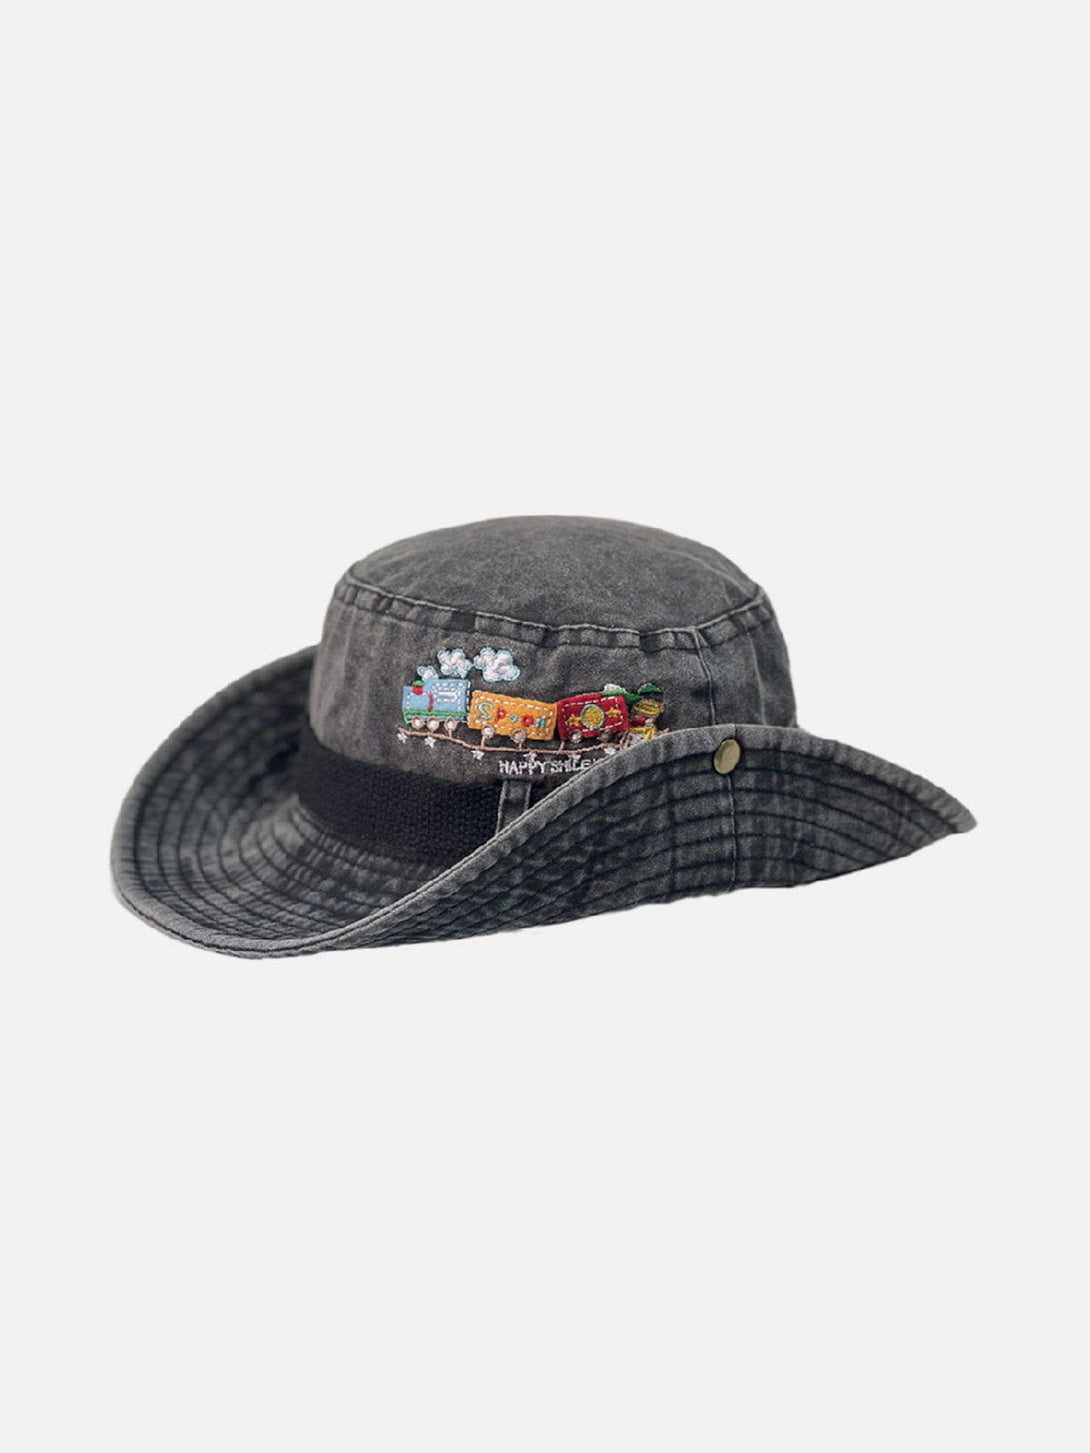 Majesda® - Train Embroidery Washed Distressed Casual Cargo Hat- Outfit Ideas - Streetwear Fashion - majesda.com